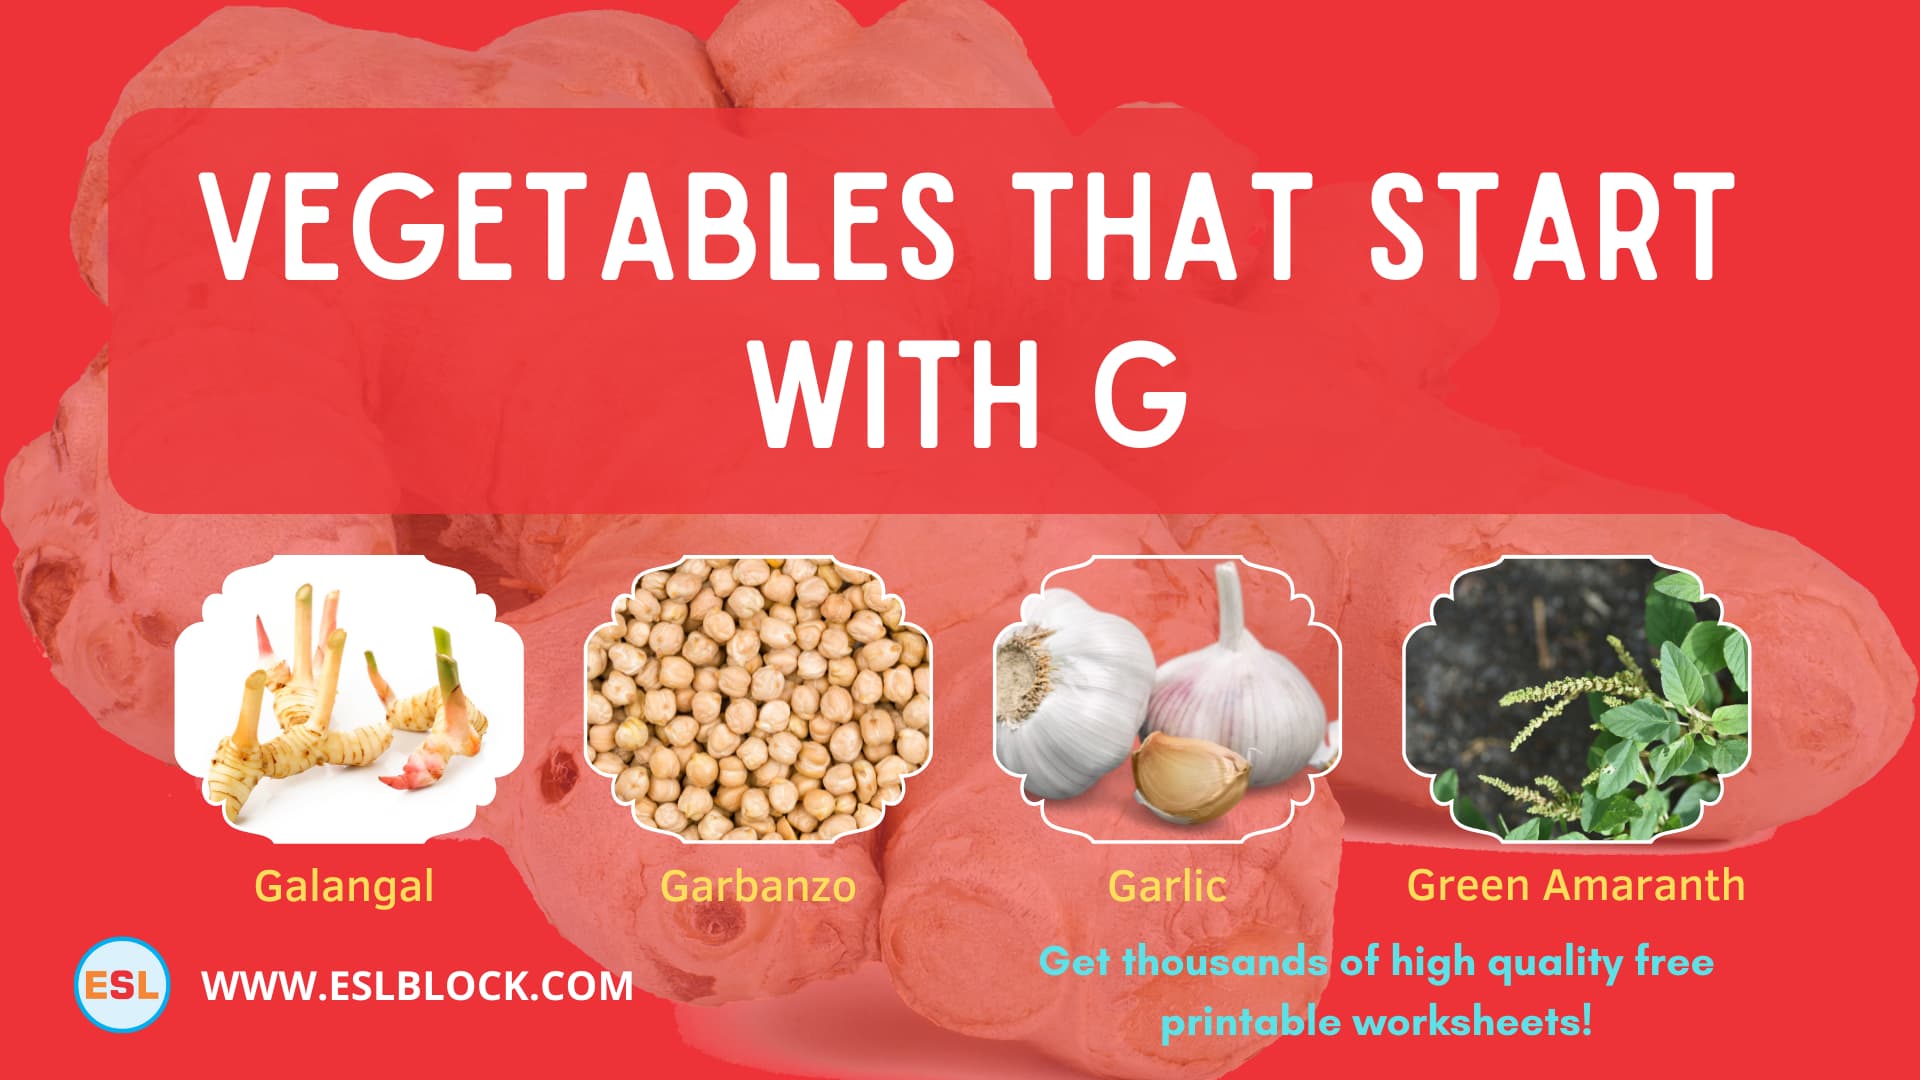 5 Letter Vegetables Starting With G, English, English Nouns, English Vocabulary, English Words, G Vegetables, G Vegetables in English, G Vegetables Names, List of Vegetables That Start With G, Nouns, Vegetables List, Vegetables Names, Vegetables That Begins With G, Vegetables That Start With G, Vocabulary